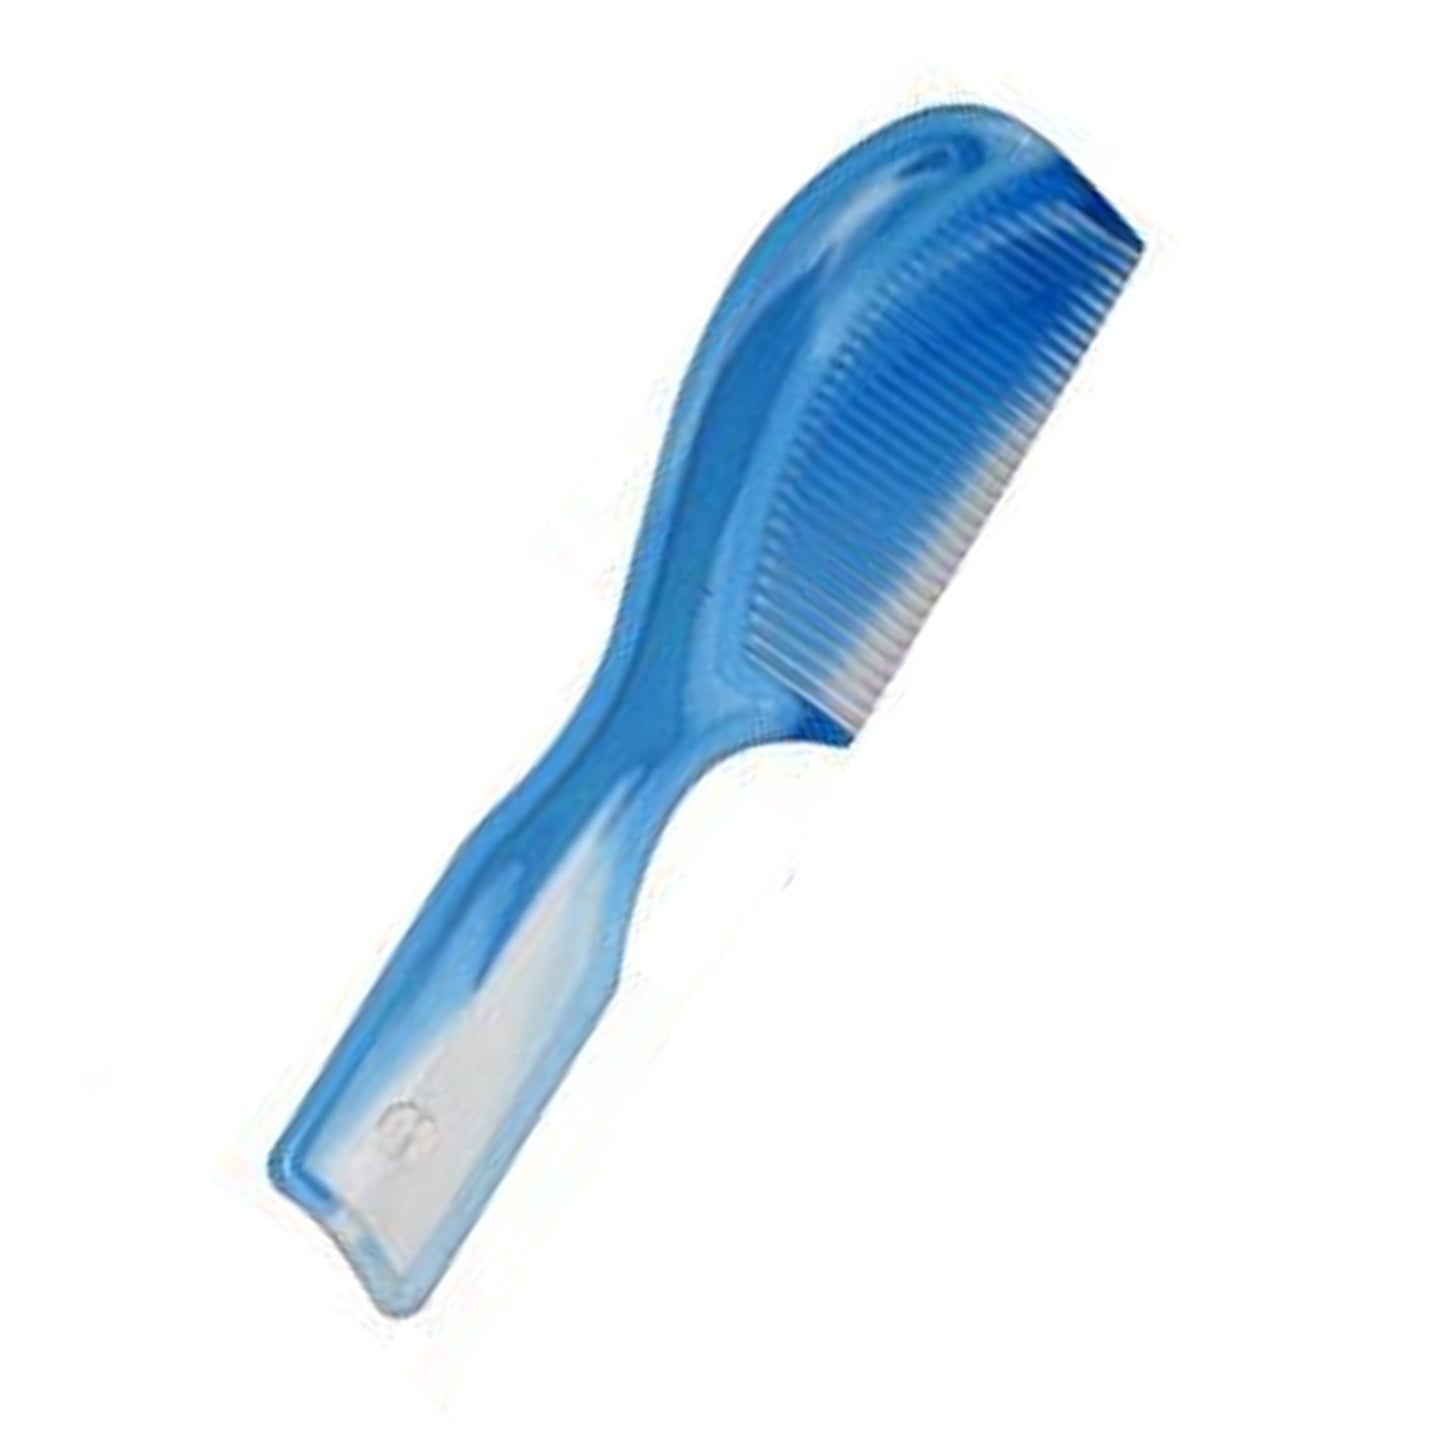 PLASTIC COMB WITH HANDLE